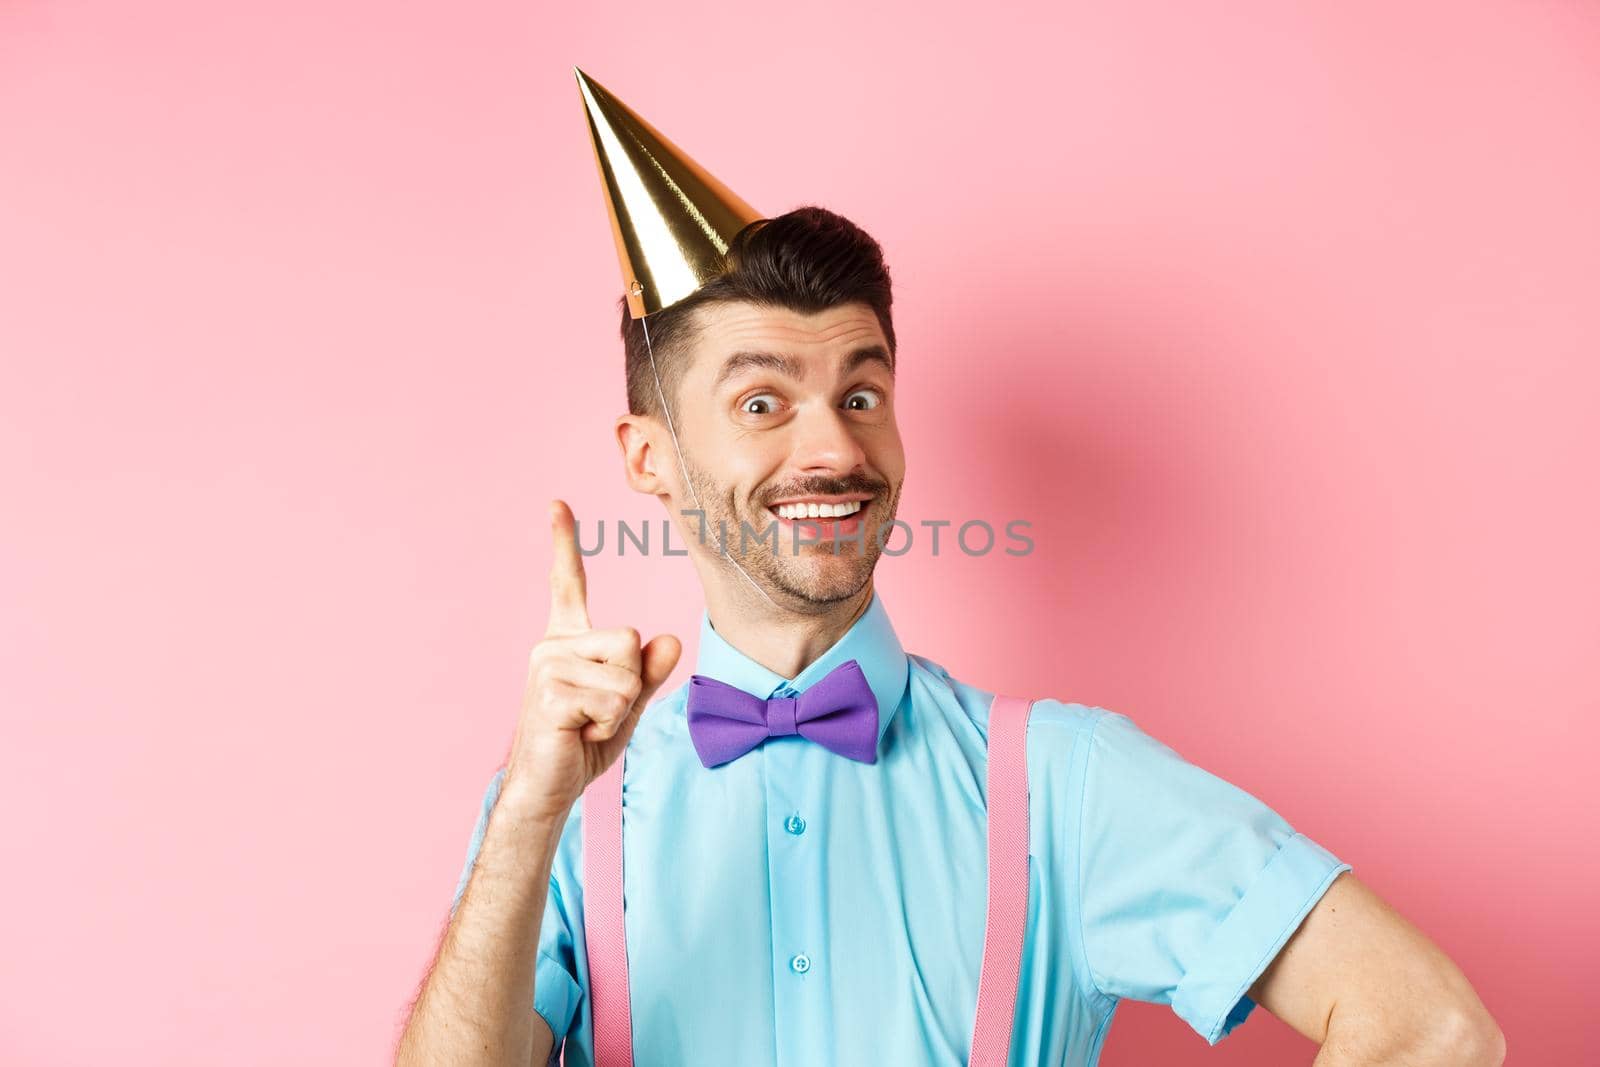 Holidays and celebration concept. Image of happy man in birthday party hat pitching an idea, raising finger and smiling, have plan or solution, standing over pink background.